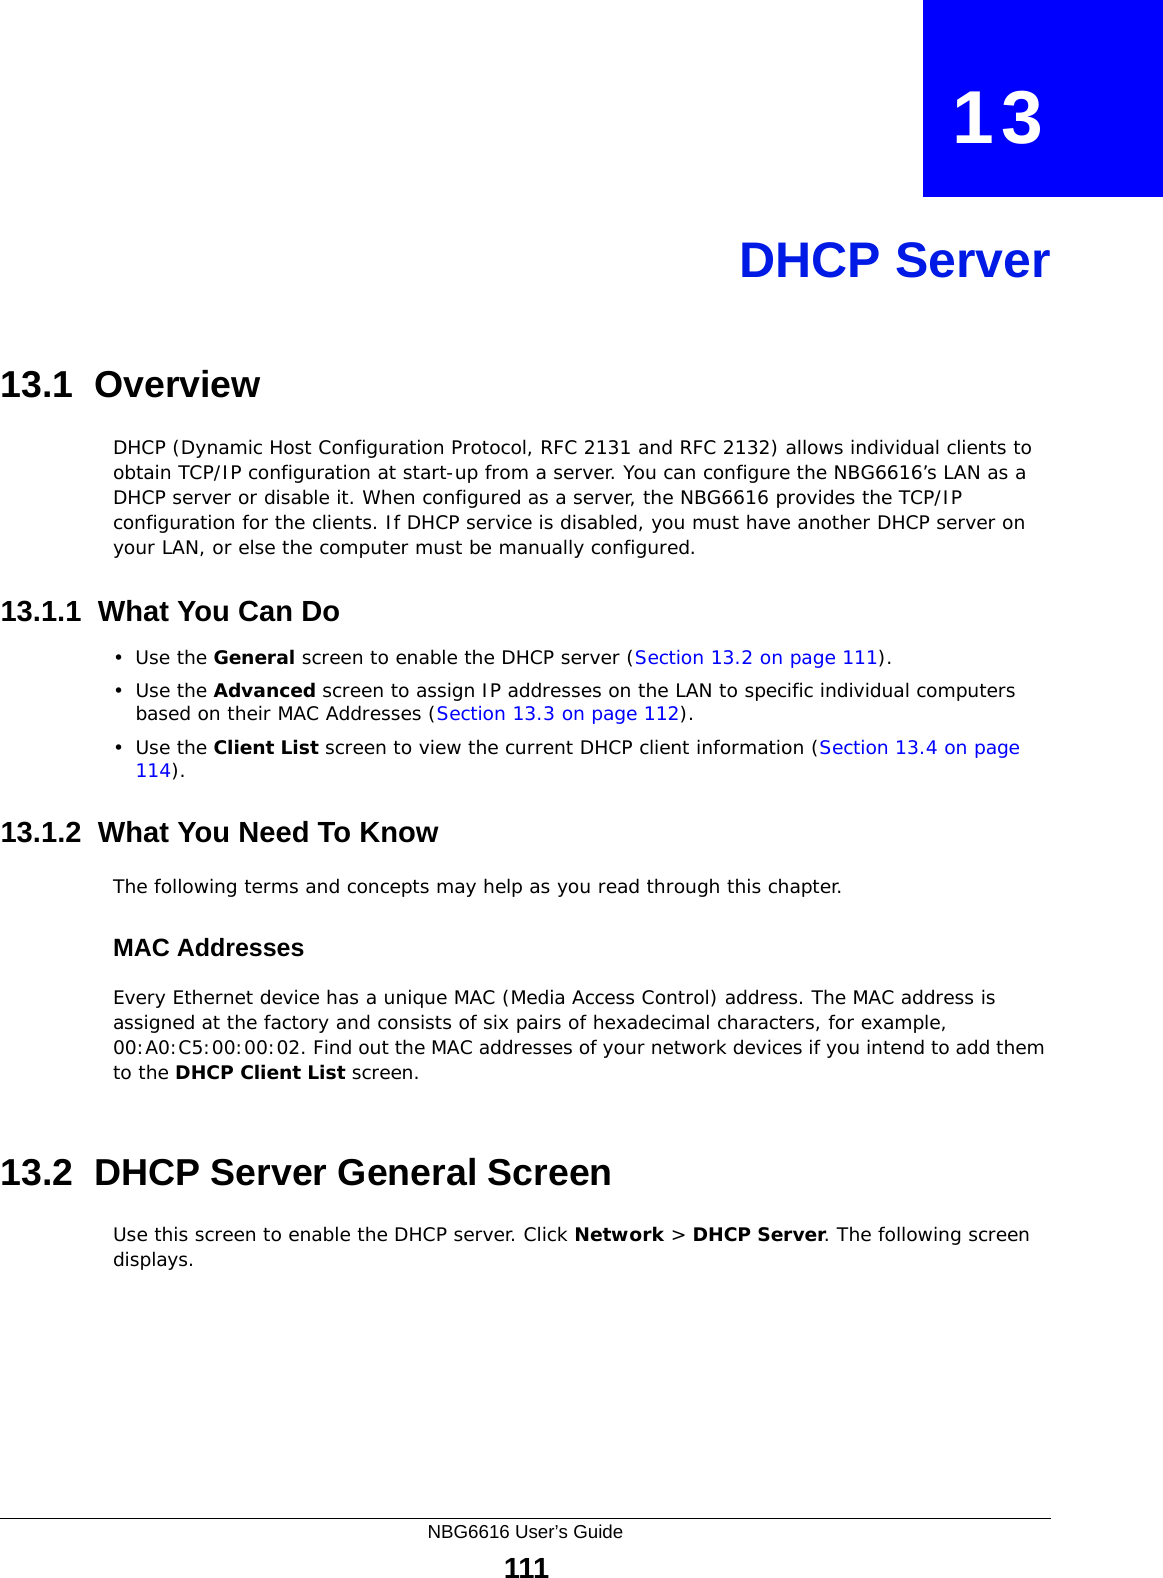 NBG6616 User’s Guide111CHAPTER   13DHCP Server13.1  OverviewDHCP (Dynamic Host Configuration Protocol, RFC 2131 and RFC 2132) allows individual clients to obtain TCP/IP configuration at start-up from a server. You can configure the NBG6616’s LAN as a DHCP server or disable it. When configured as a server, the NBG6616 provides the TCP/IP configuration for the clients. If DHCP service is disabled, you must have another DHCP server on your LAN, or else the computer must be manually configured.13.1.1  What You Can Do•Use the General screen to enable the DHCP server (Section 13.2 on page 111).•Use the Advanced screen to assign IP addresses on the LAN to specific individual computers based on their MAC Addresses (Section 13.3 on page 112).•Use the Client List screen to view the current DHCP client information (Section 13.4 on page 114). 13.1.2  What You Need To KnowThe following terms and concepts may help as you read through this chapter.MAC AddressesEvery Ethernet device has a unique MAC (Media Access Control) address. The MAC address is assigned at the factory and consists of six pairs of hexadecimal characters, for example, 00:A0:C5:00:00:02. Find out the MAC addresses of your network devices if you intend to add them to the DHCP Client List screen.13.2  DHCP Server General ScreenUse this screen to enable the DHCP server. Click Network &gt; DHCP Server. The following screen displays.